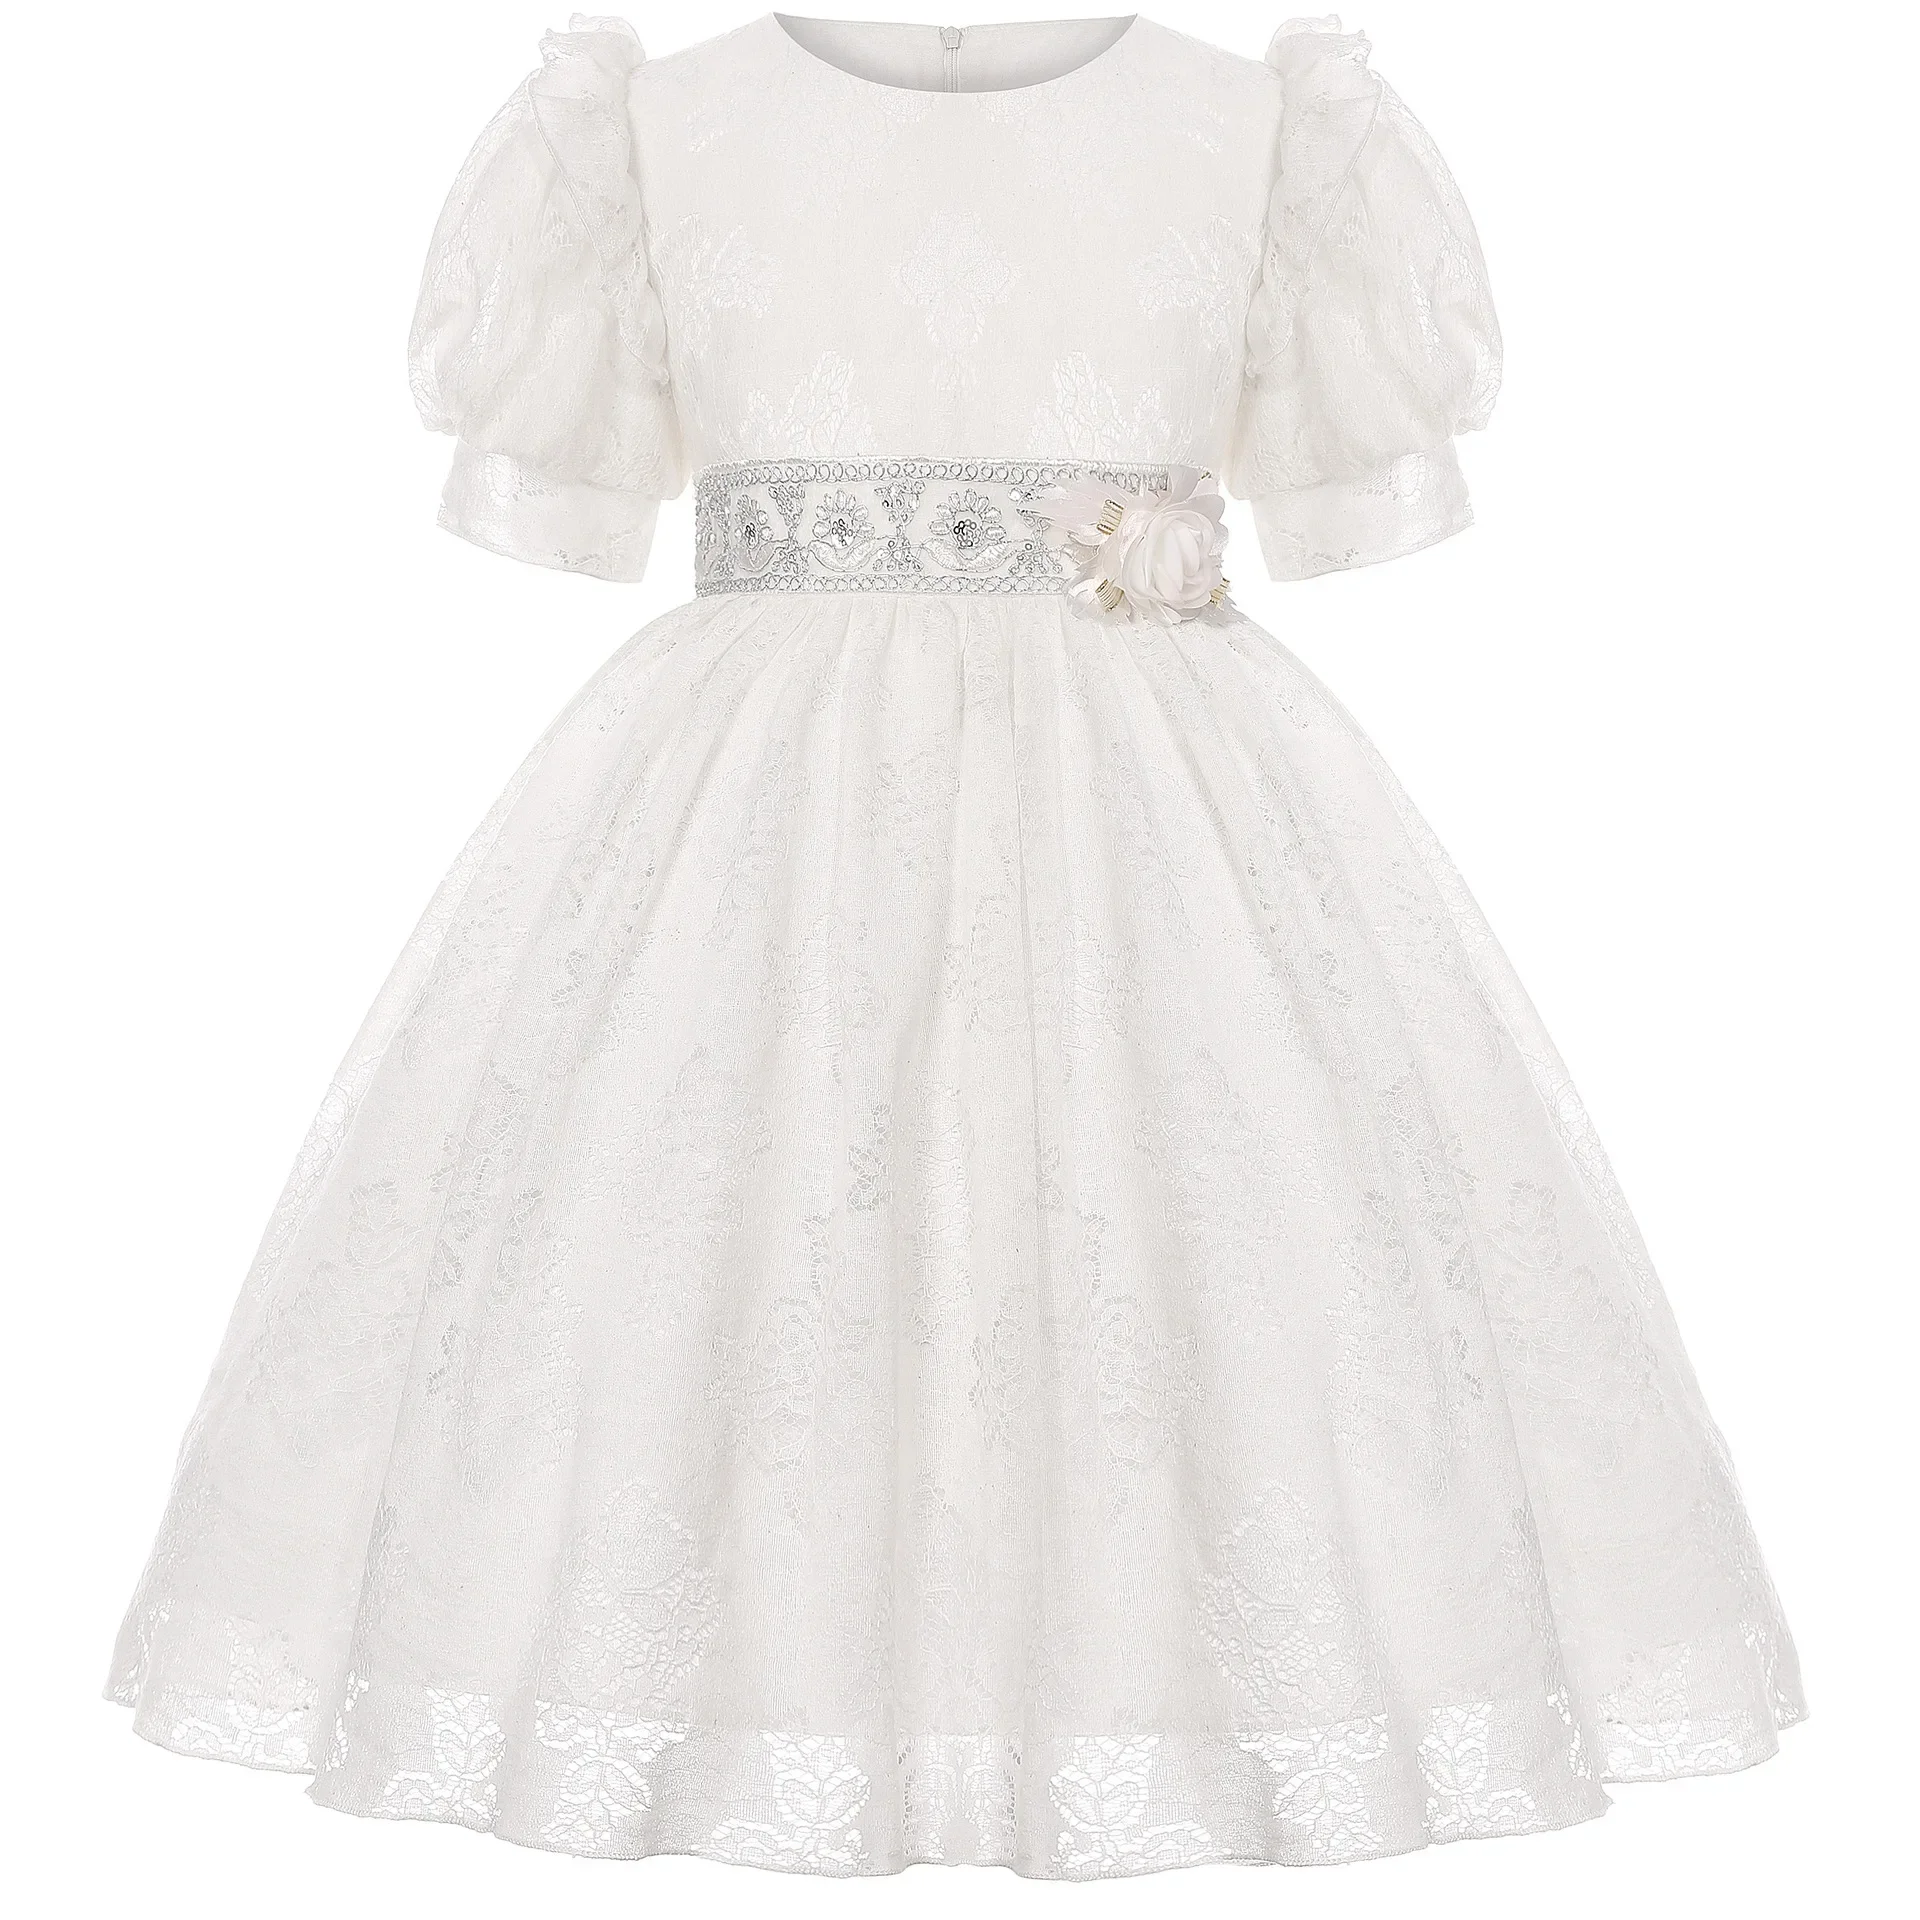 

Vintage Sequined Girl Lace Dress White Tutu Tulle Princess Dresses for Baby Summer Sweet Kids Children Clothes 2 6 8 10 Years